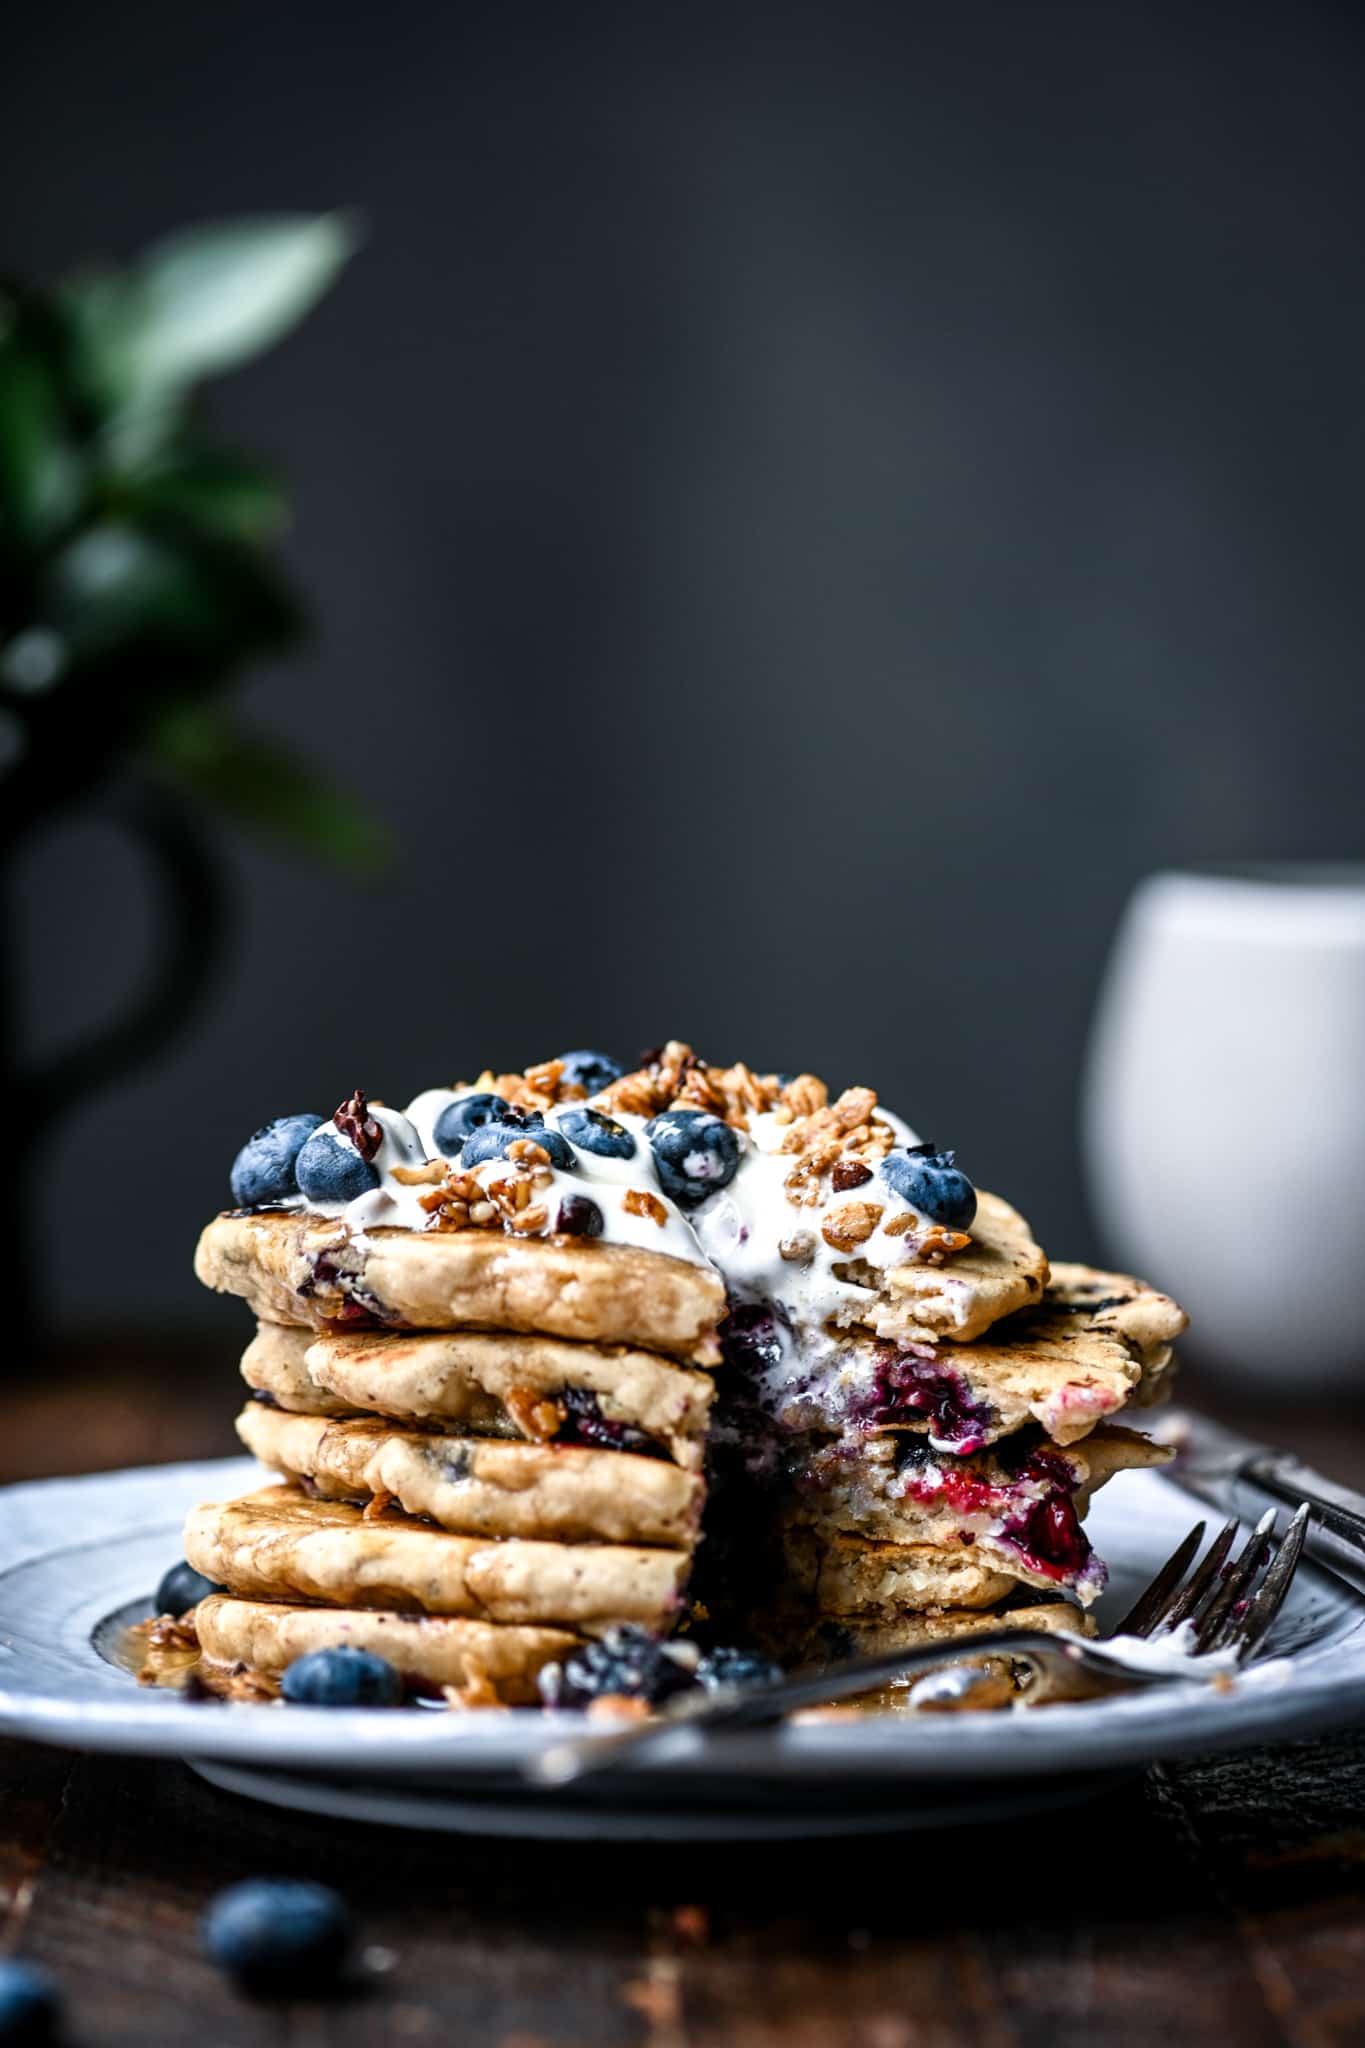 Side view of a stack of gluten free vegan blueberry pancakes with granola and fresh blueberries with a bite taken out on a white plate